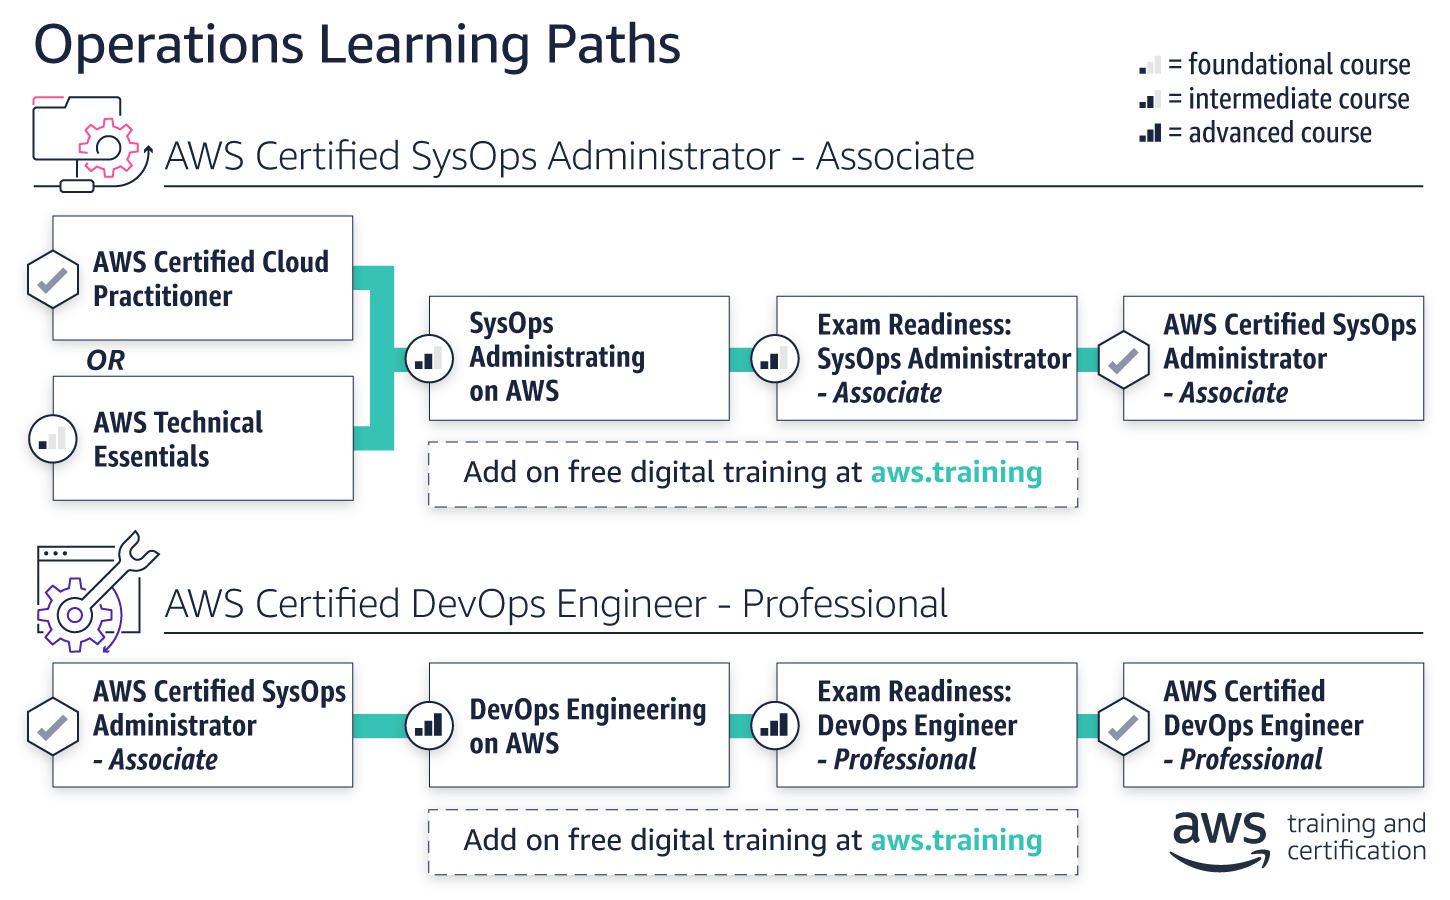 Certifications paths to become an AWS Certified SysOps Administrator or AWS Certified DevOps Engineer